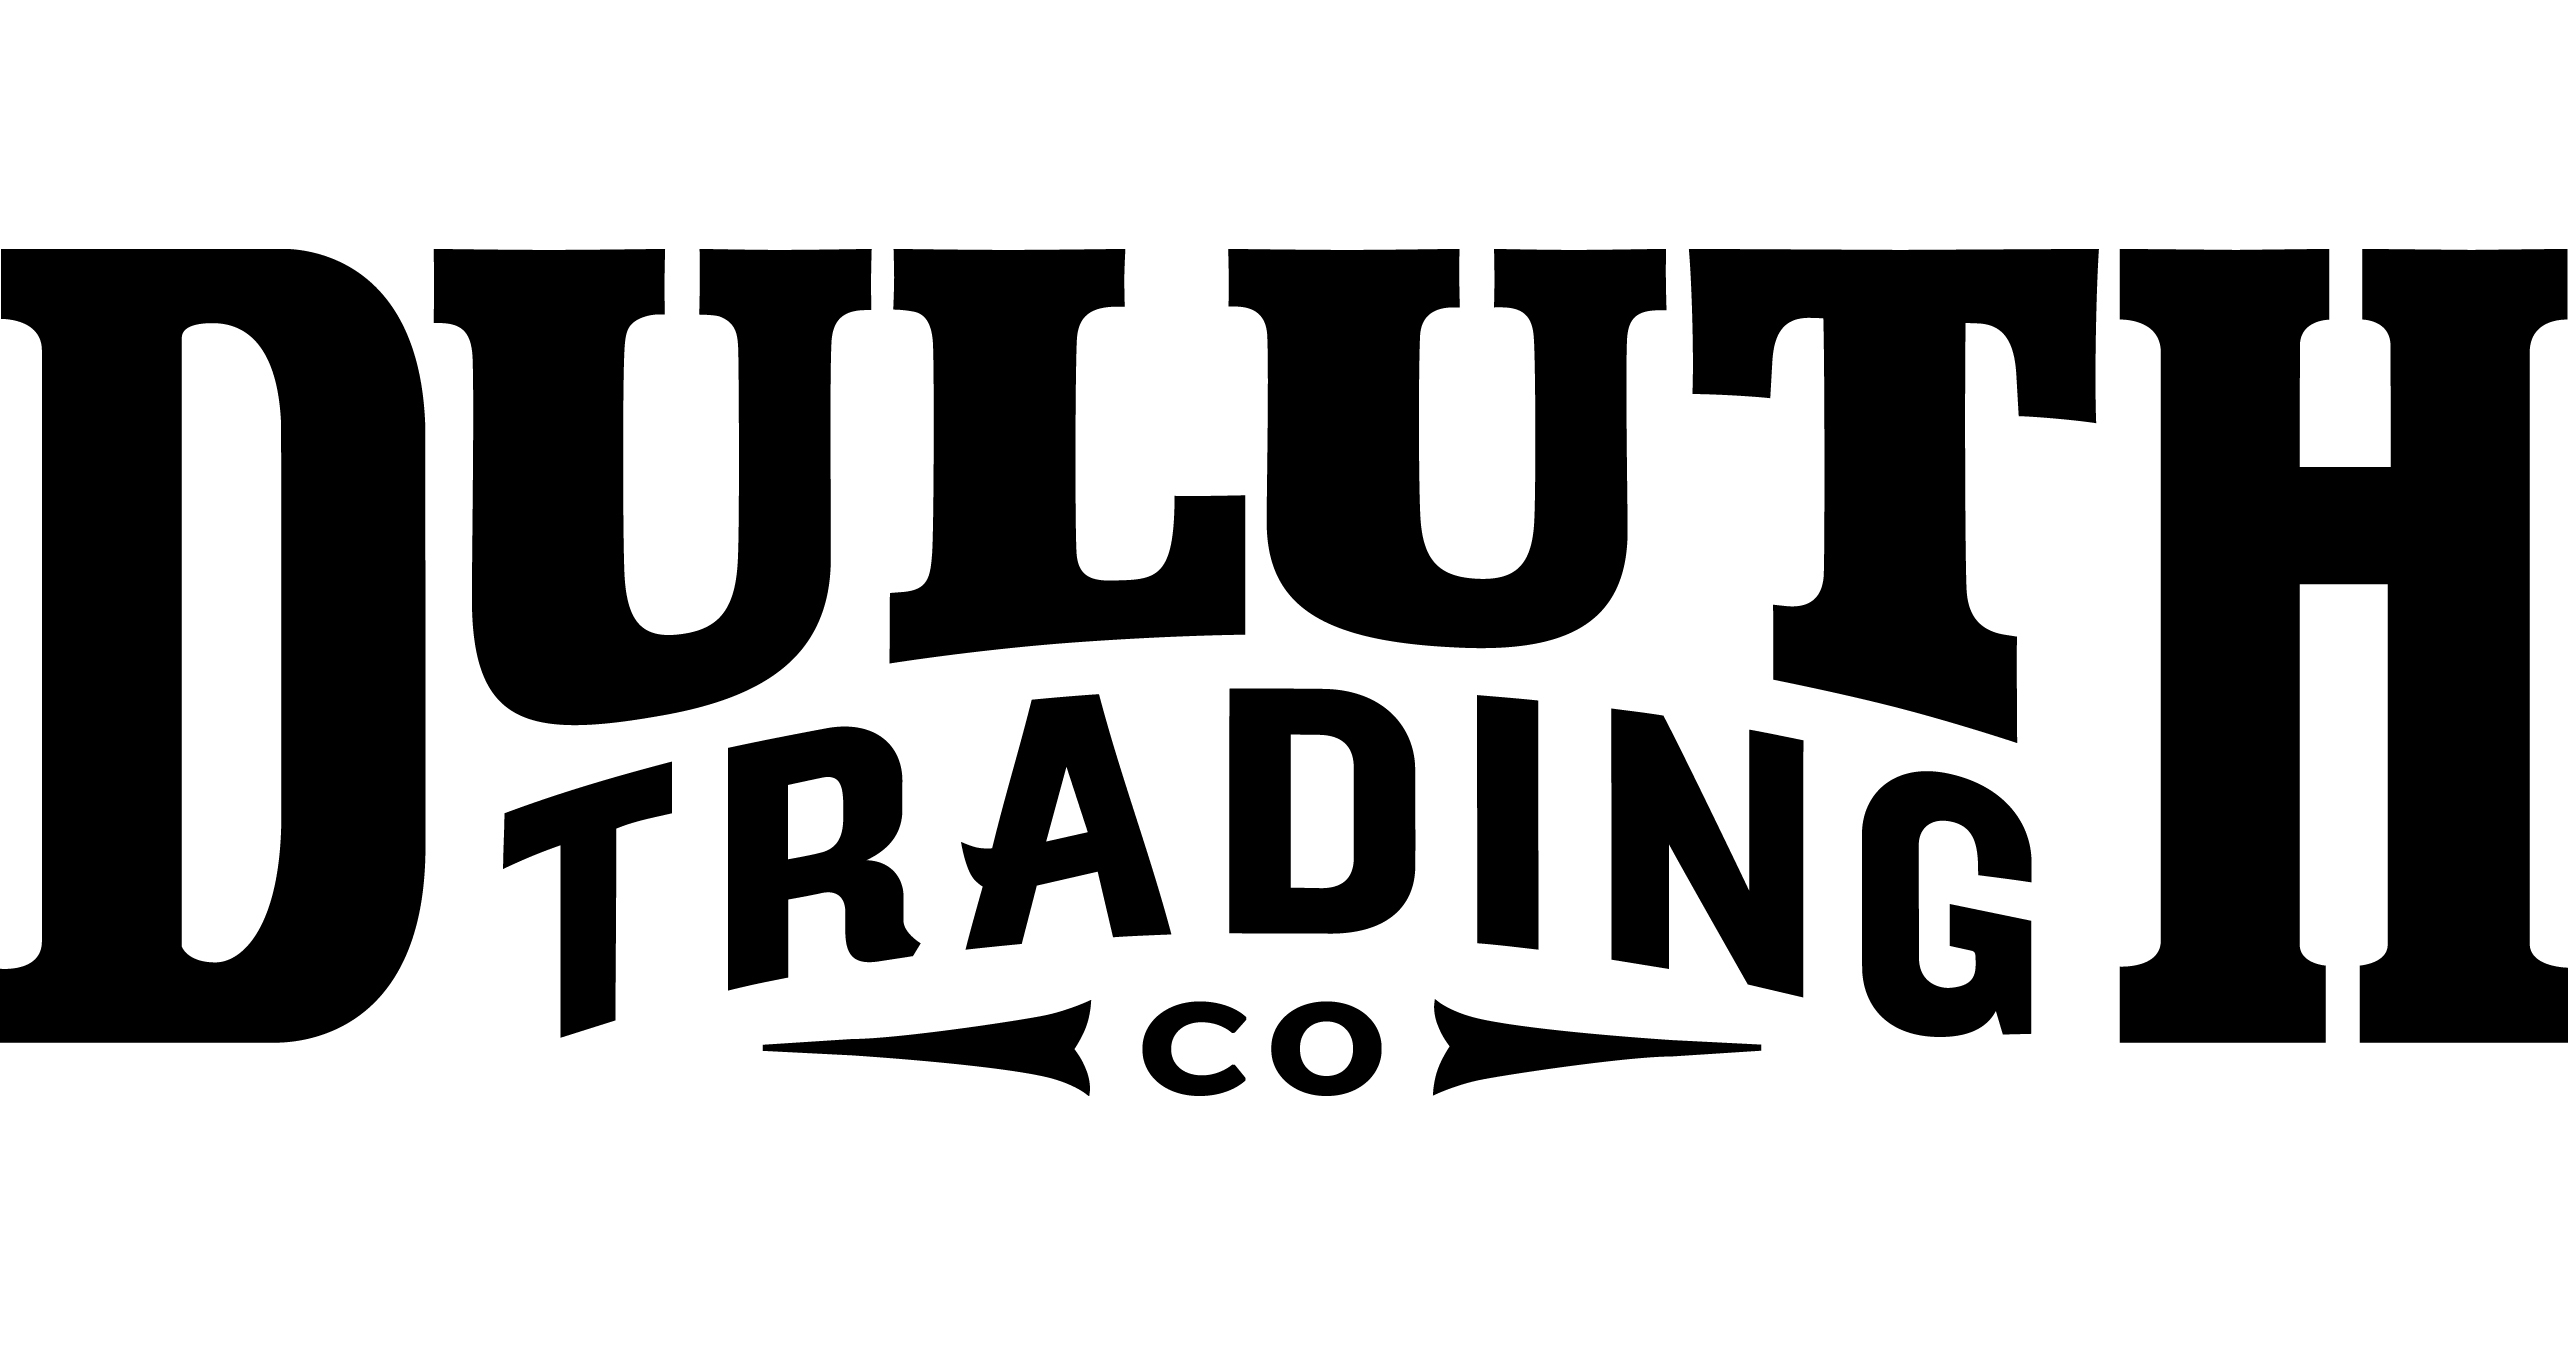 Duluth Trading Company on Instagram: “This month, we celebrate all